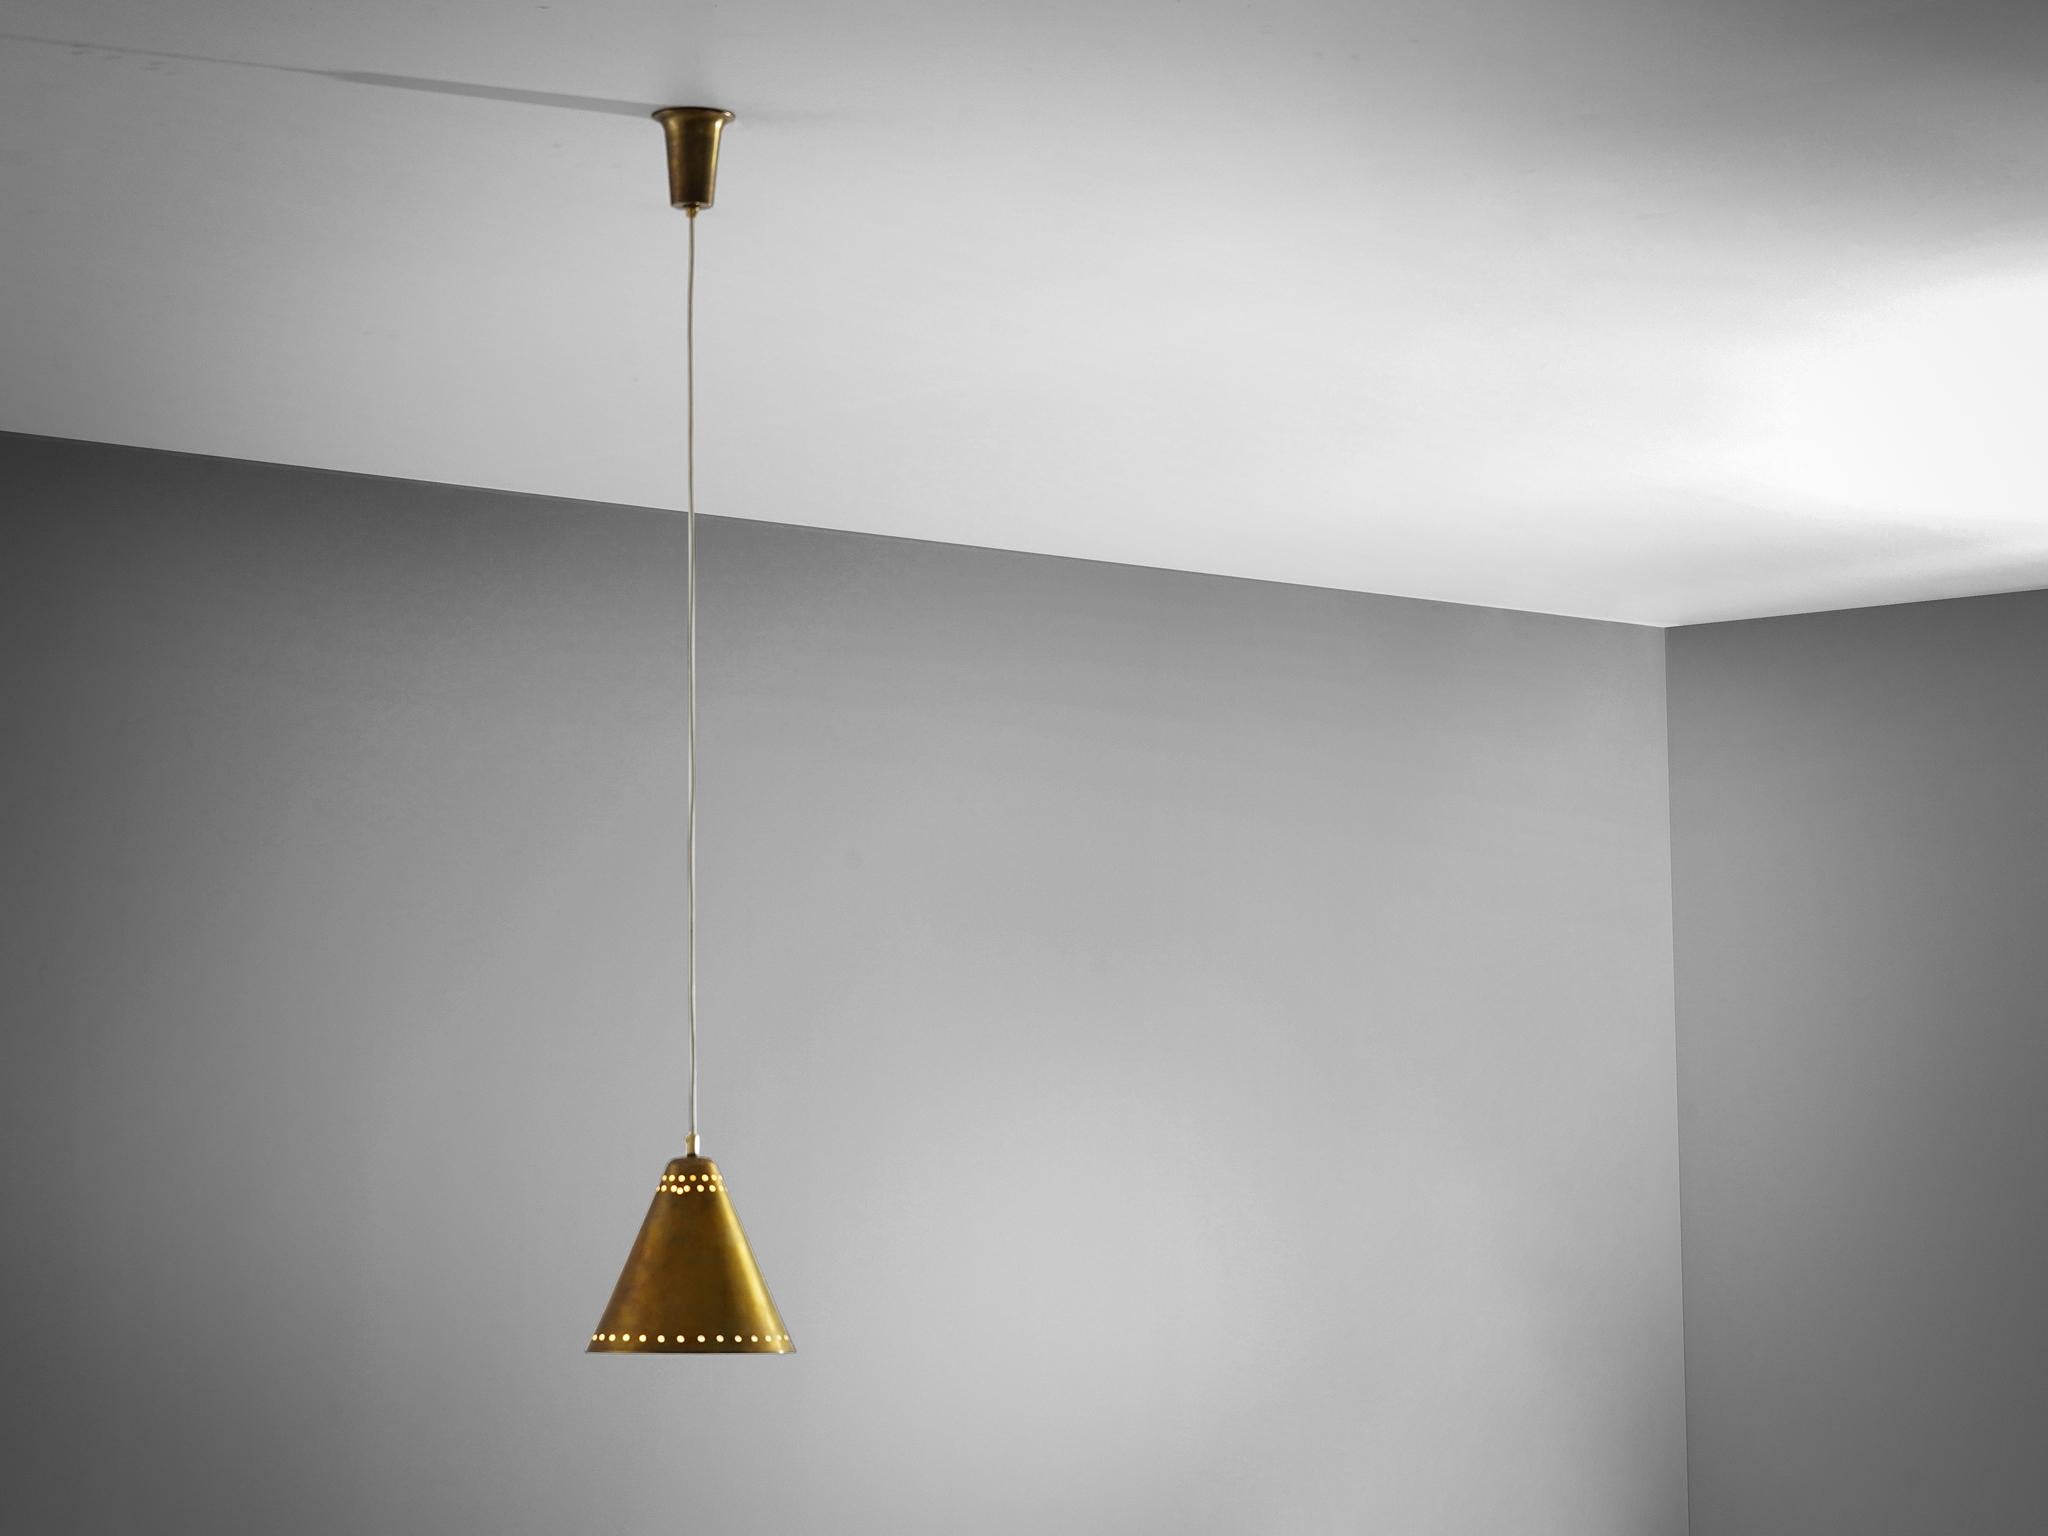 Pendant, brass, Italy, 1950s.

The conical golden lampshade features delicate perforated slots on the rim. The light from within the shade shines through these small slots, creating a gorgeous aesthetic effect. The unevenly made perforation